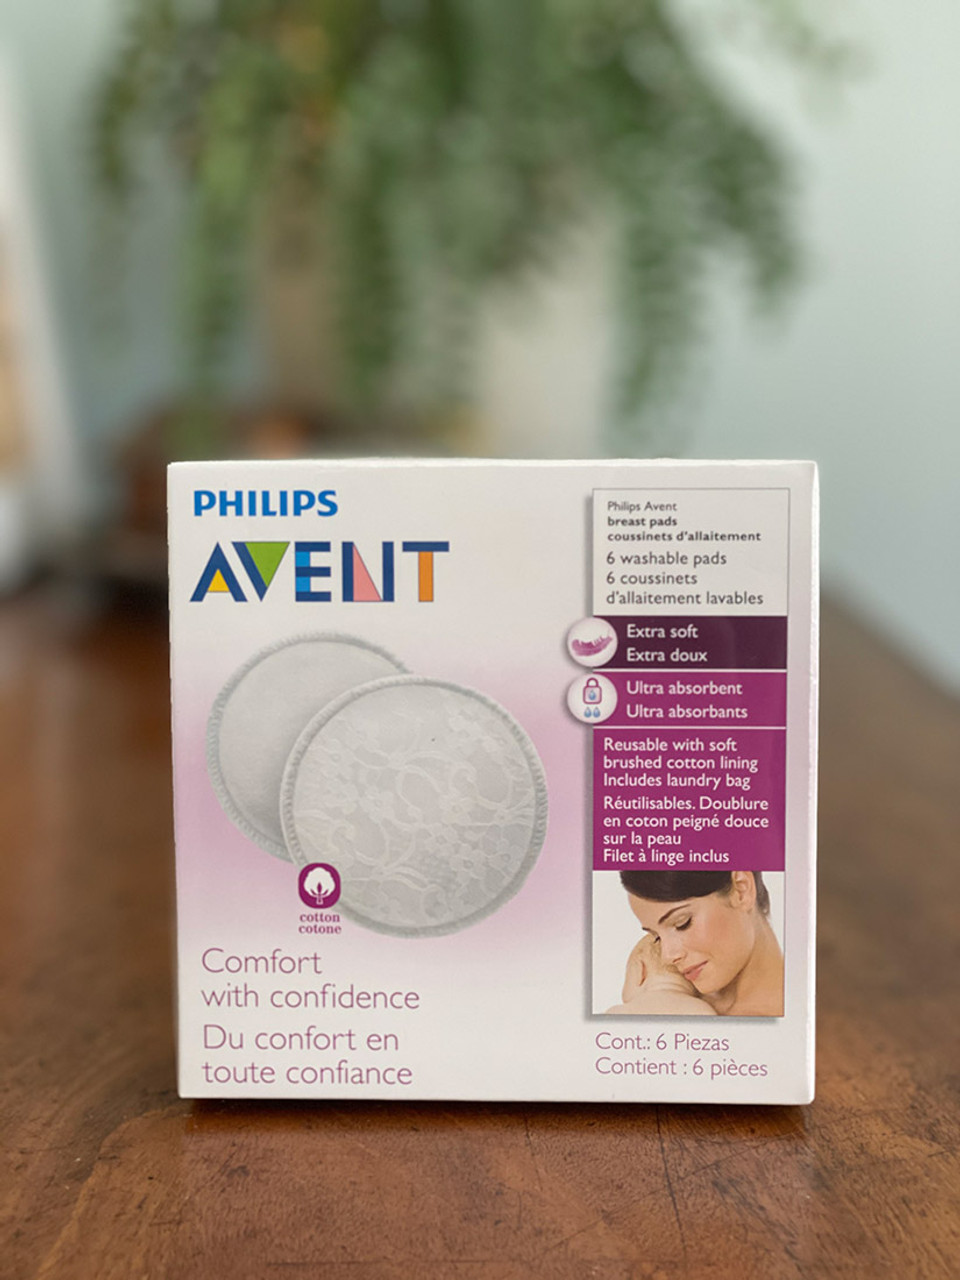 Philips Avent Washable Breast Pads (6 pack)